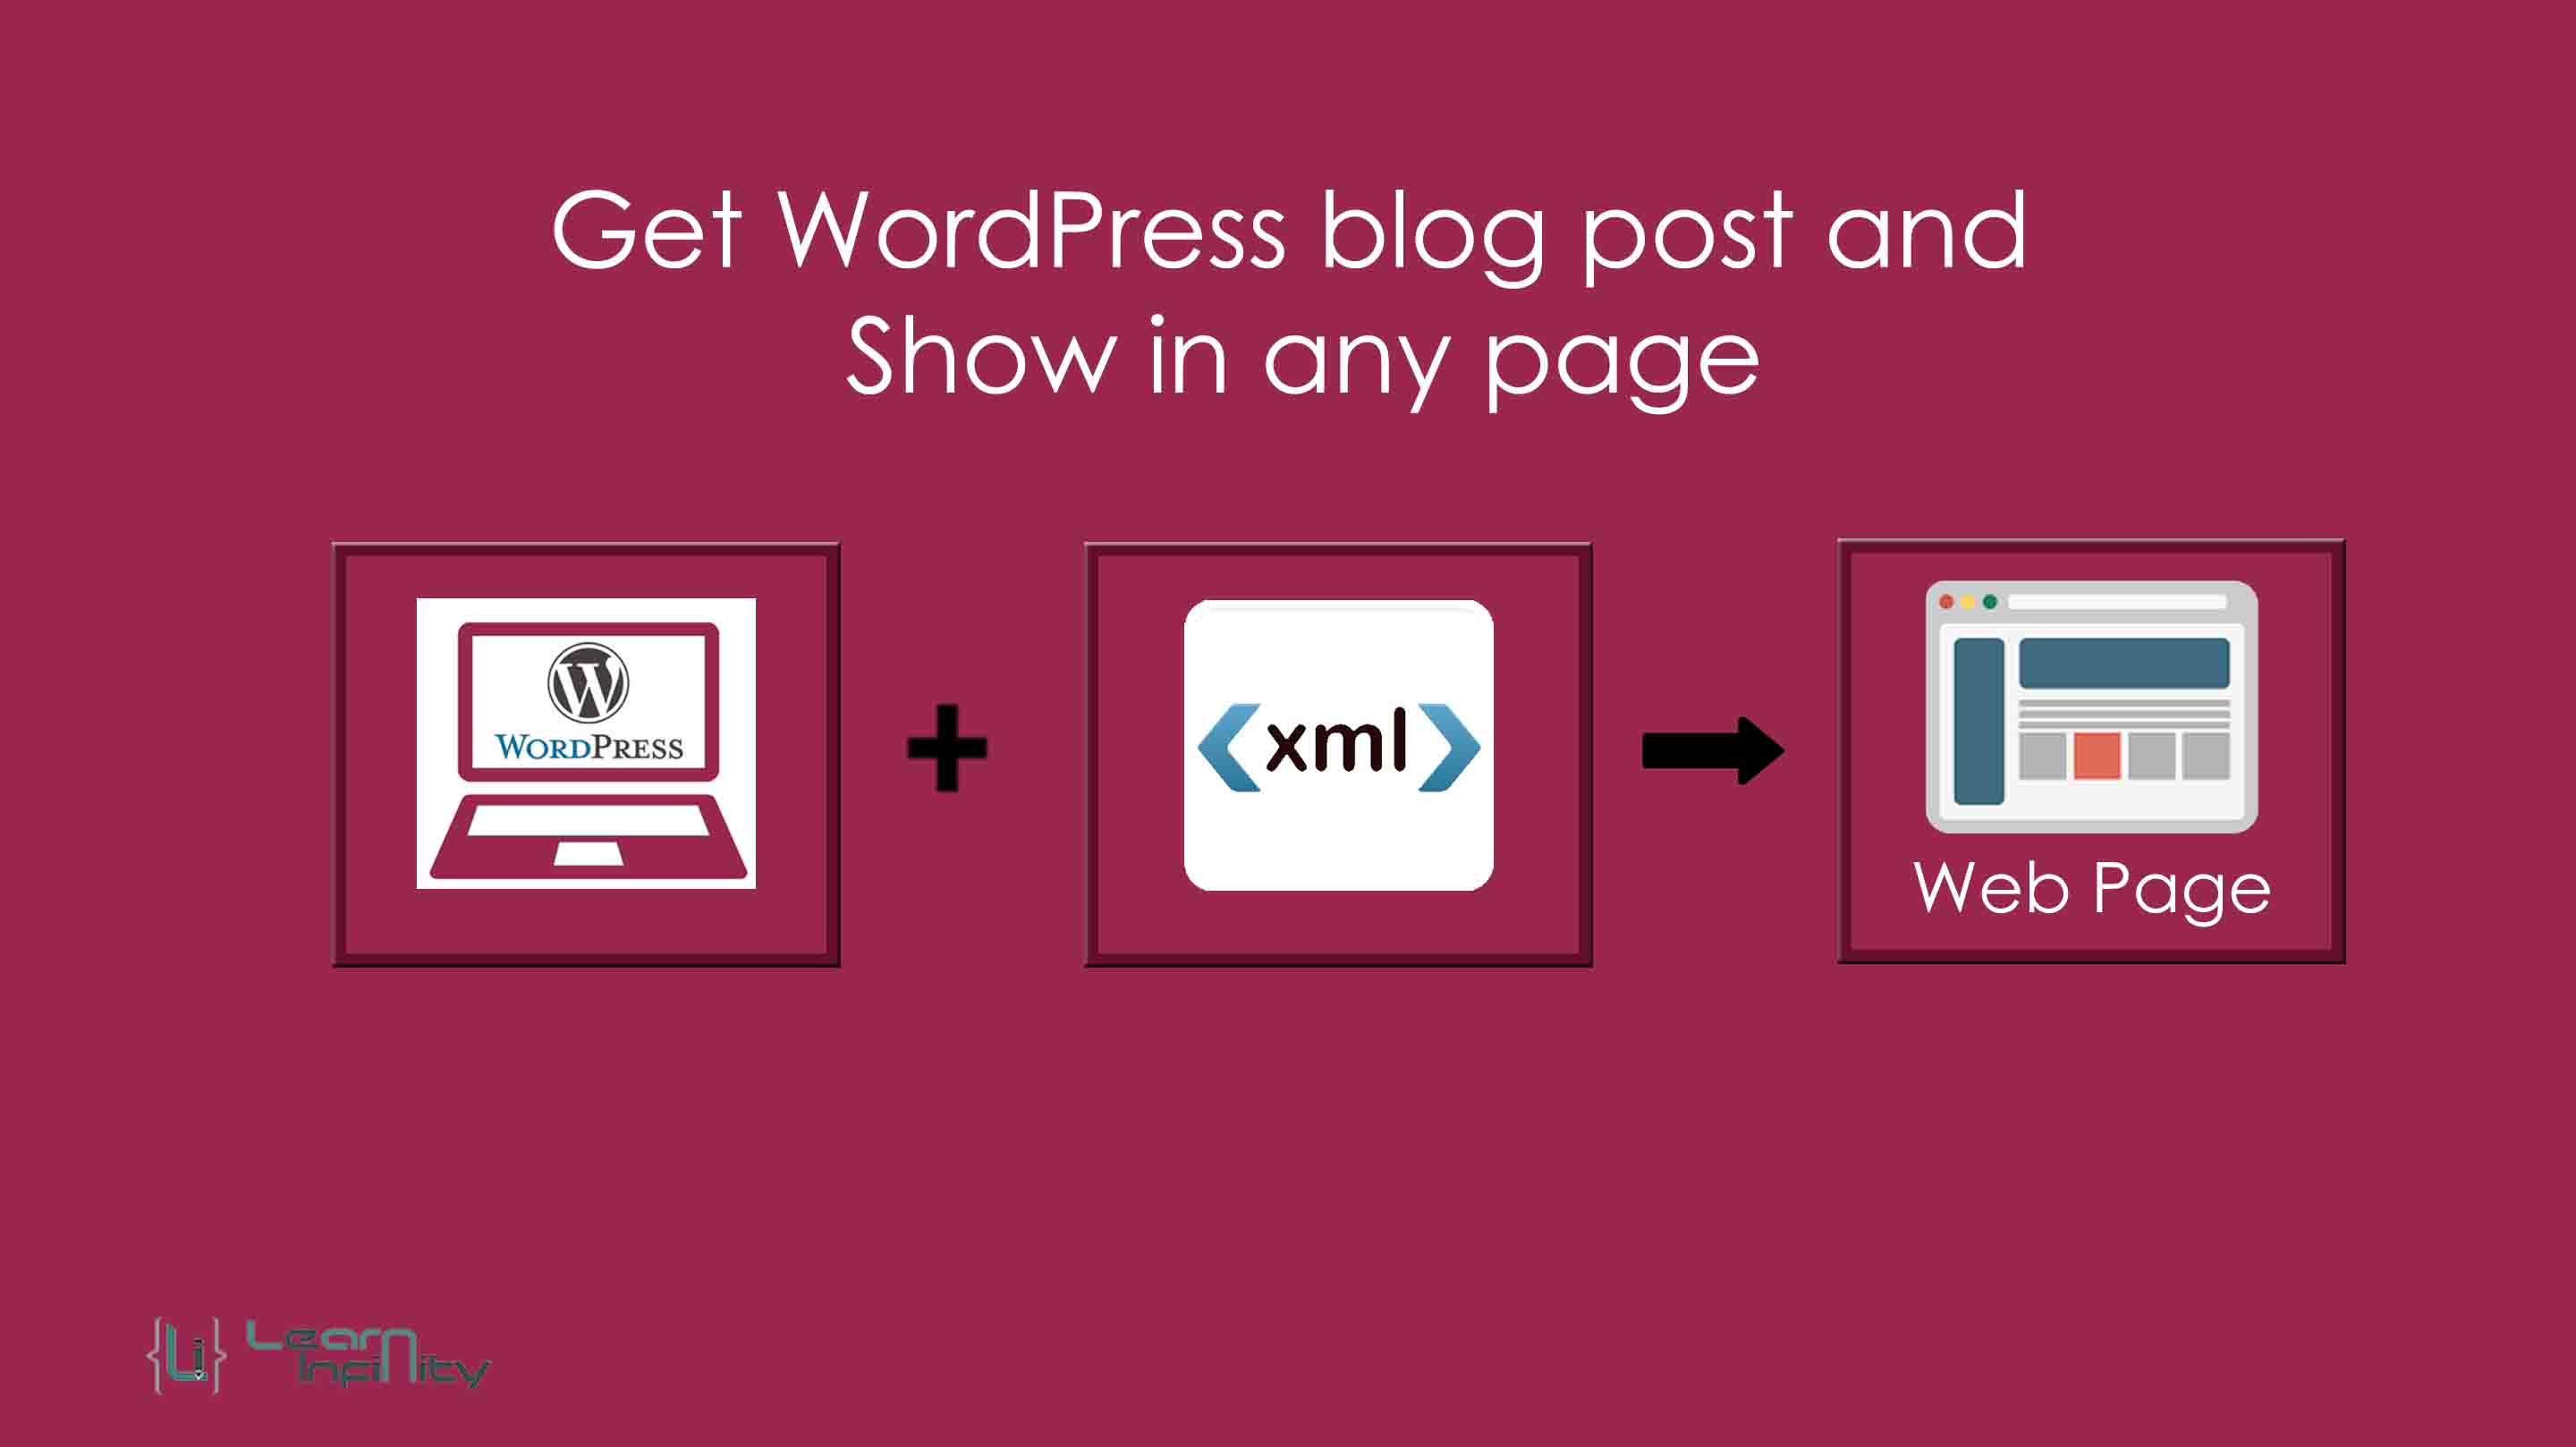 Get WordPress blog post and show in any page